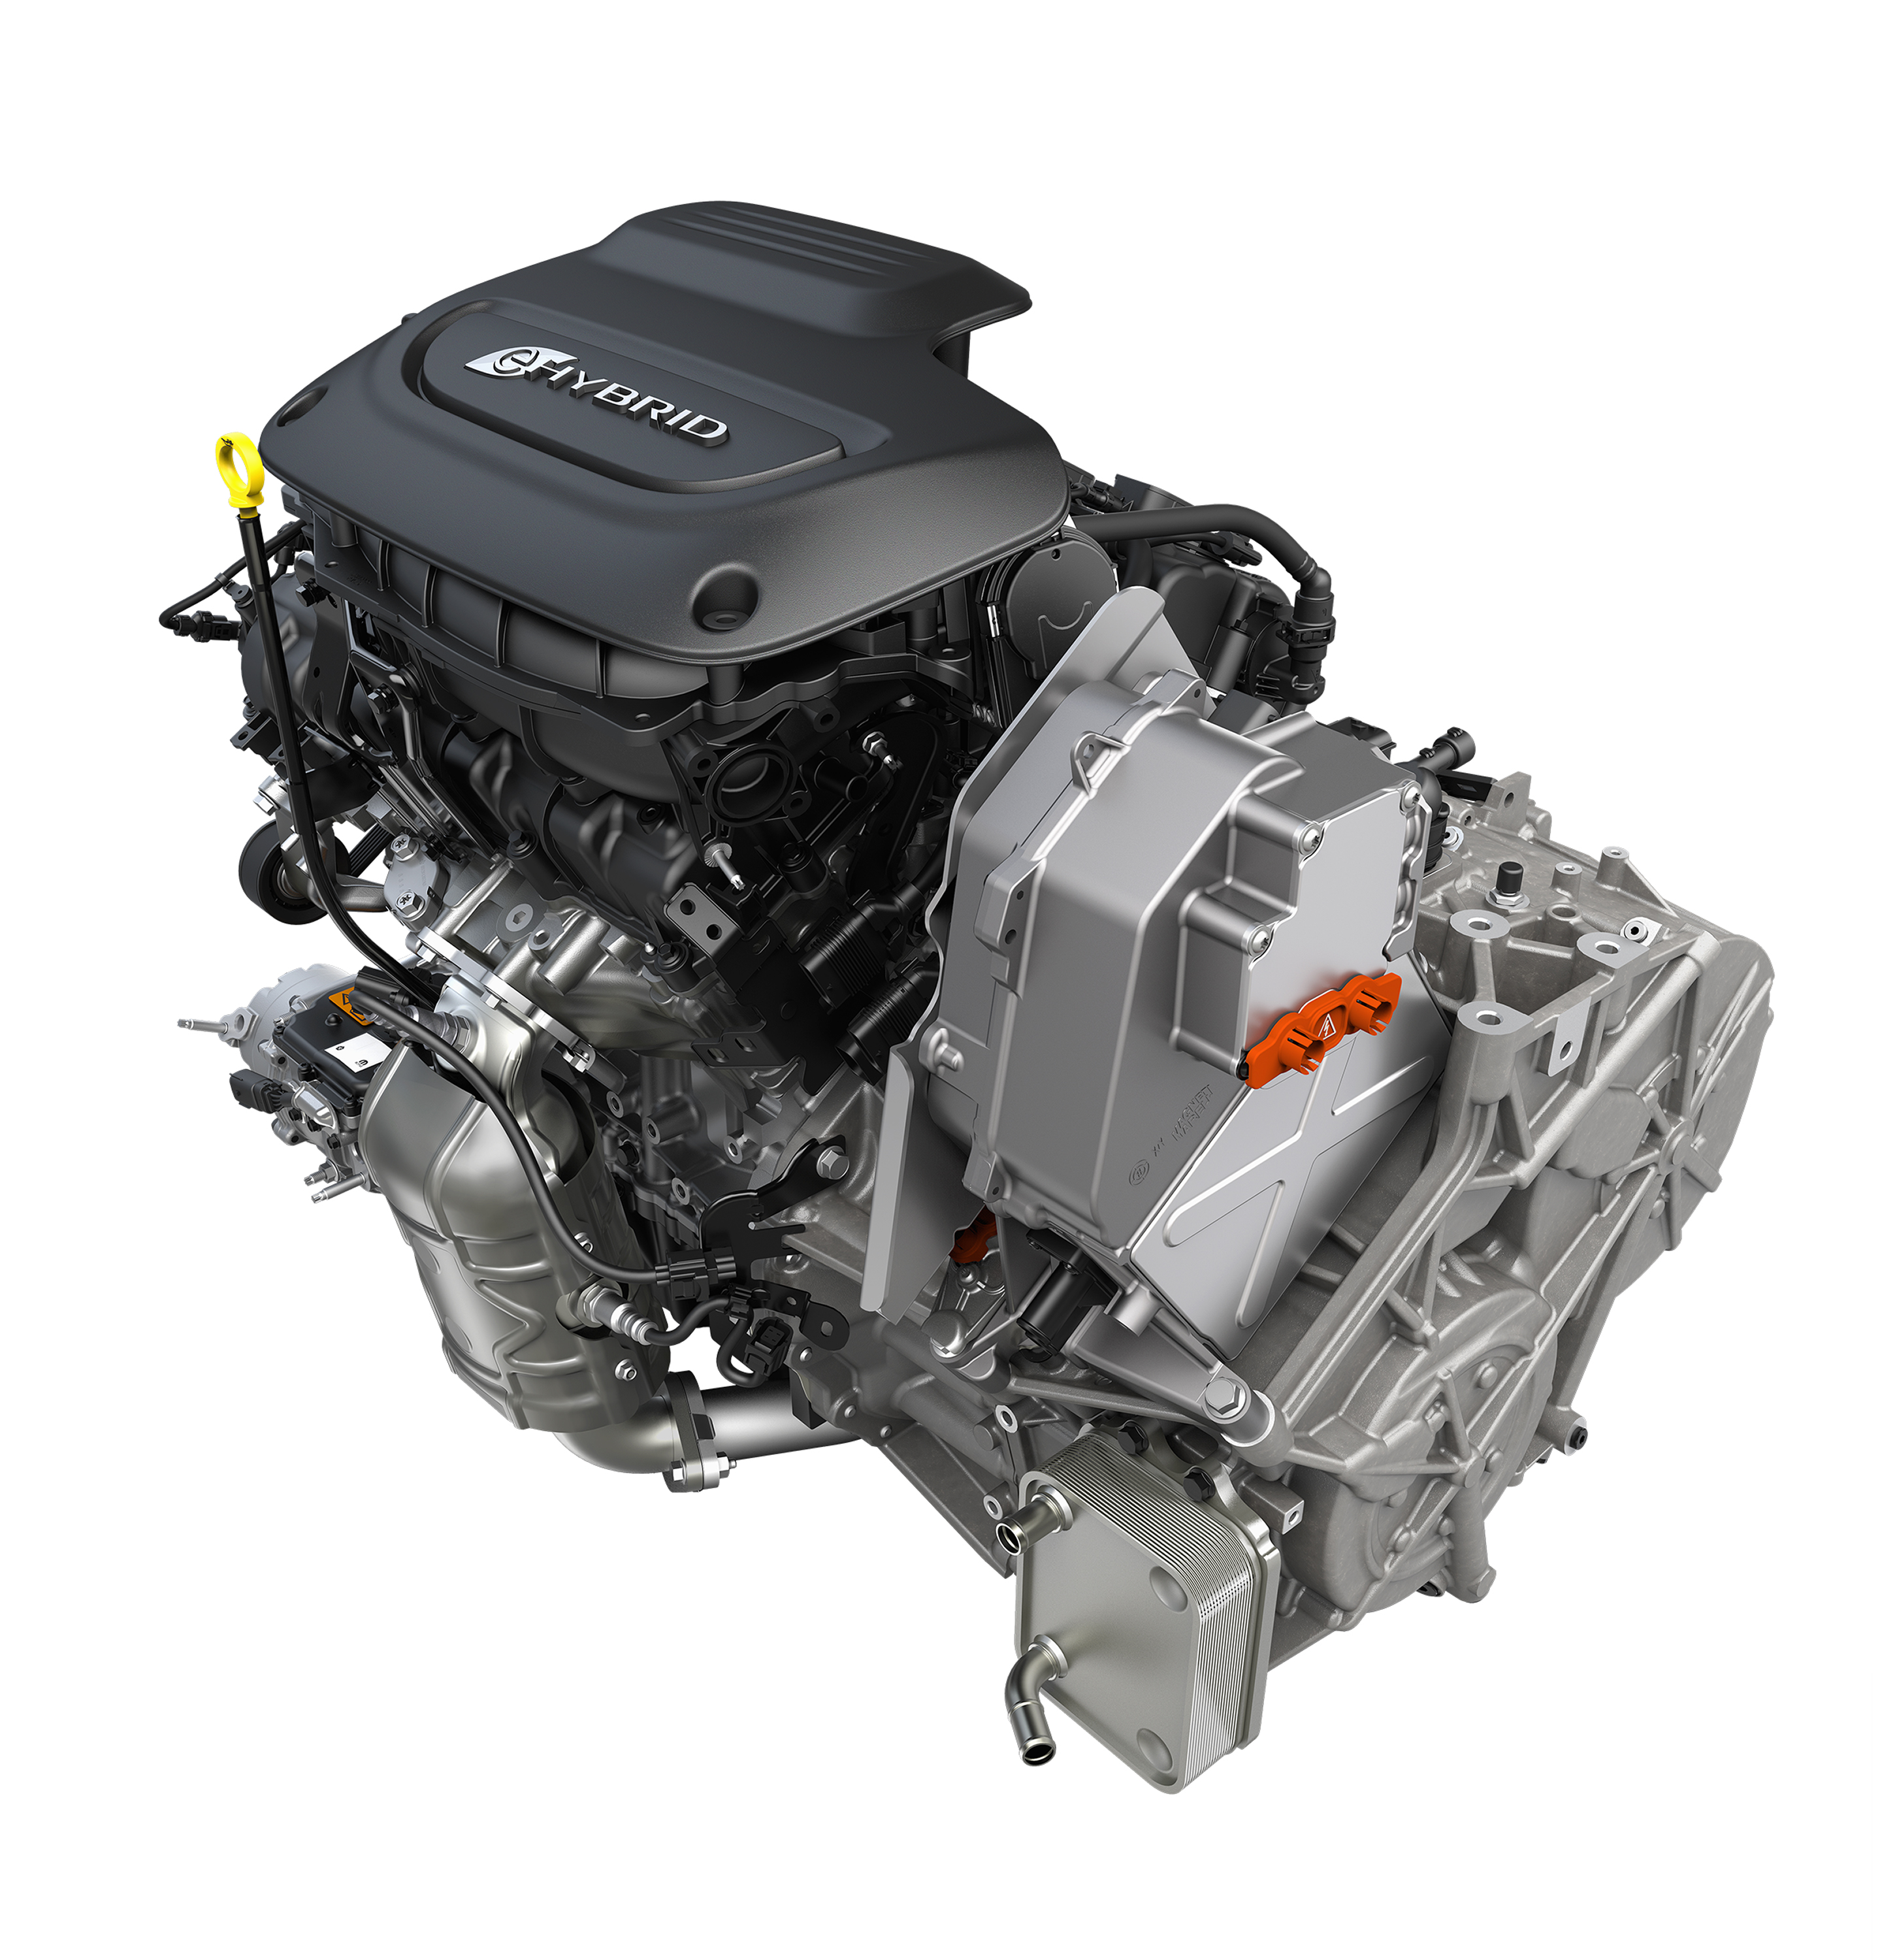 3.6-liter Pentastar eHybrid Named One of Wards 10 Best Engines for Second Year in a Row